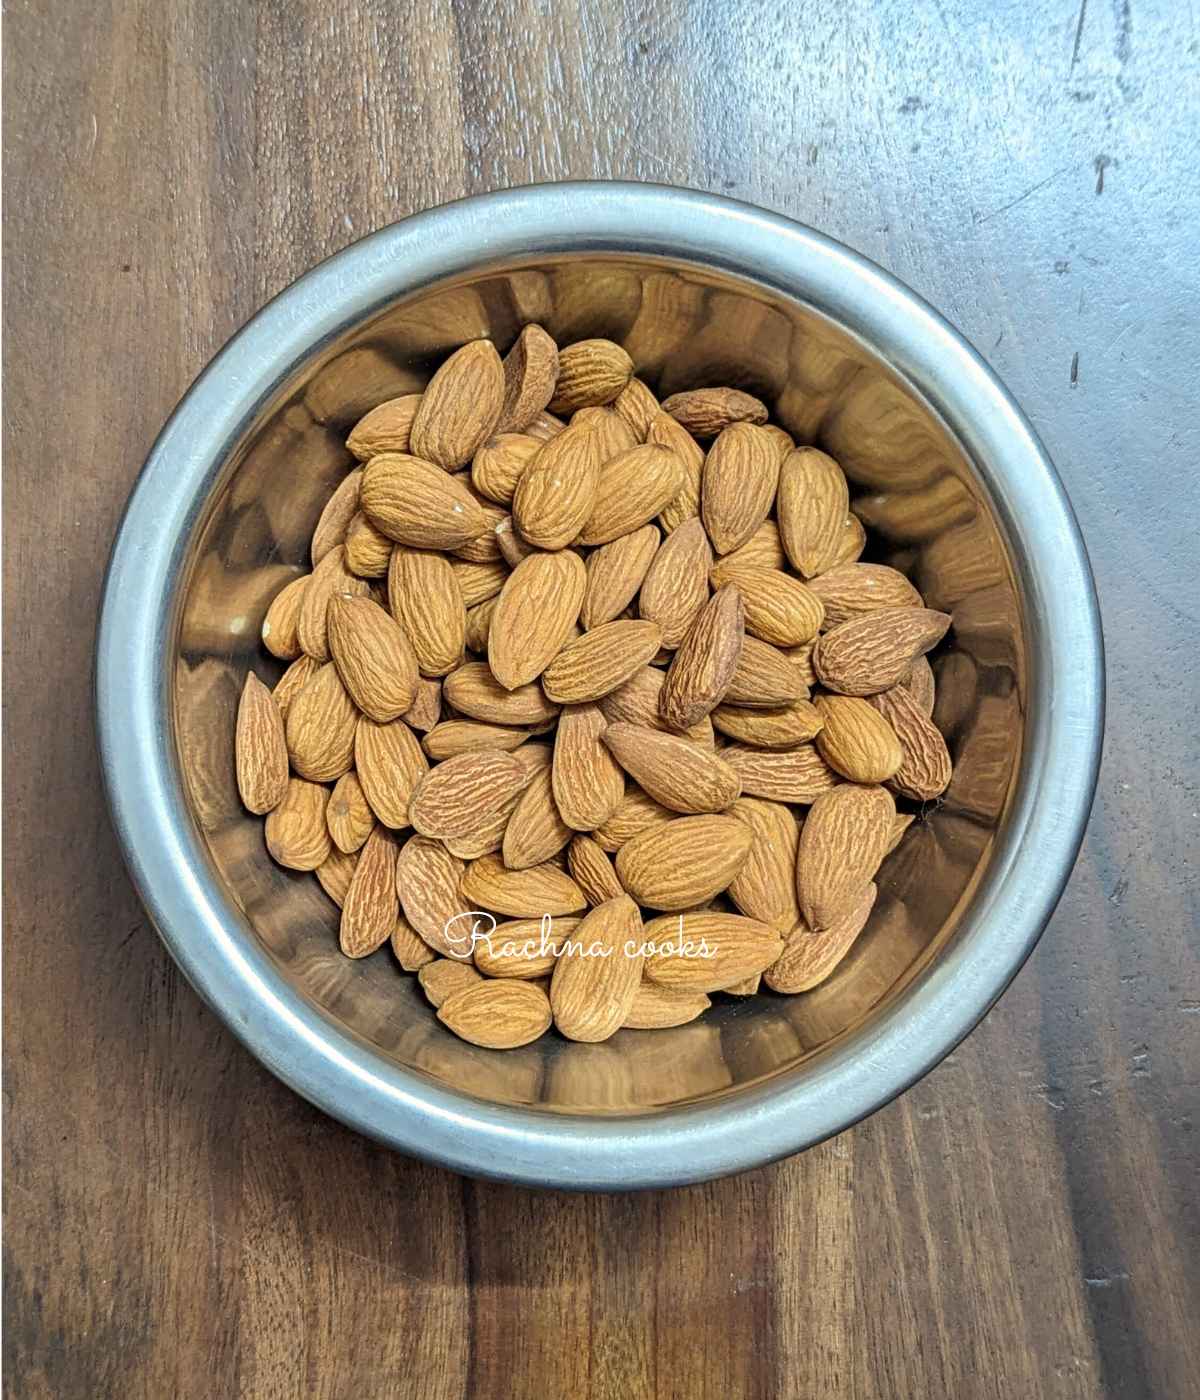 A cup of raw almonds